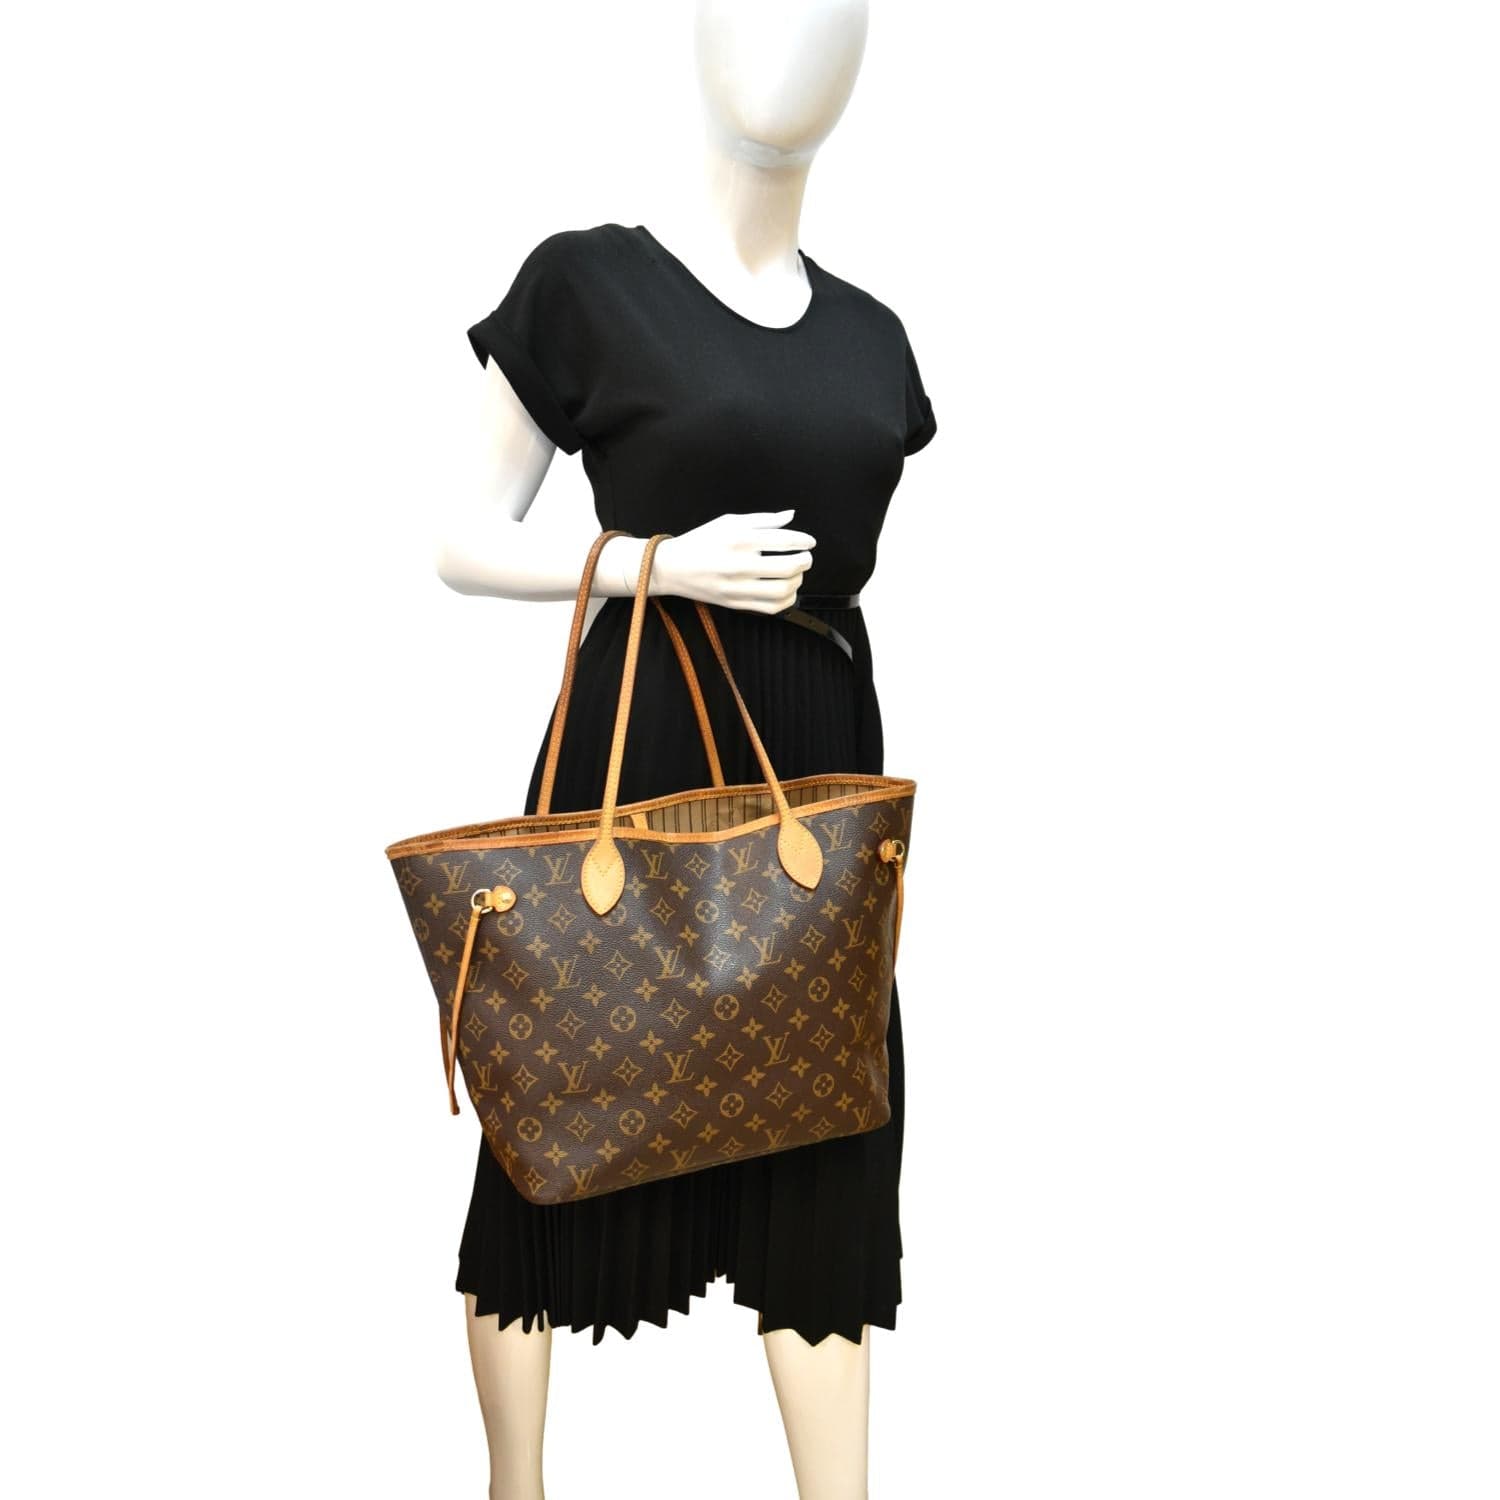 Louis Vuitton Neverfull Tote 363587